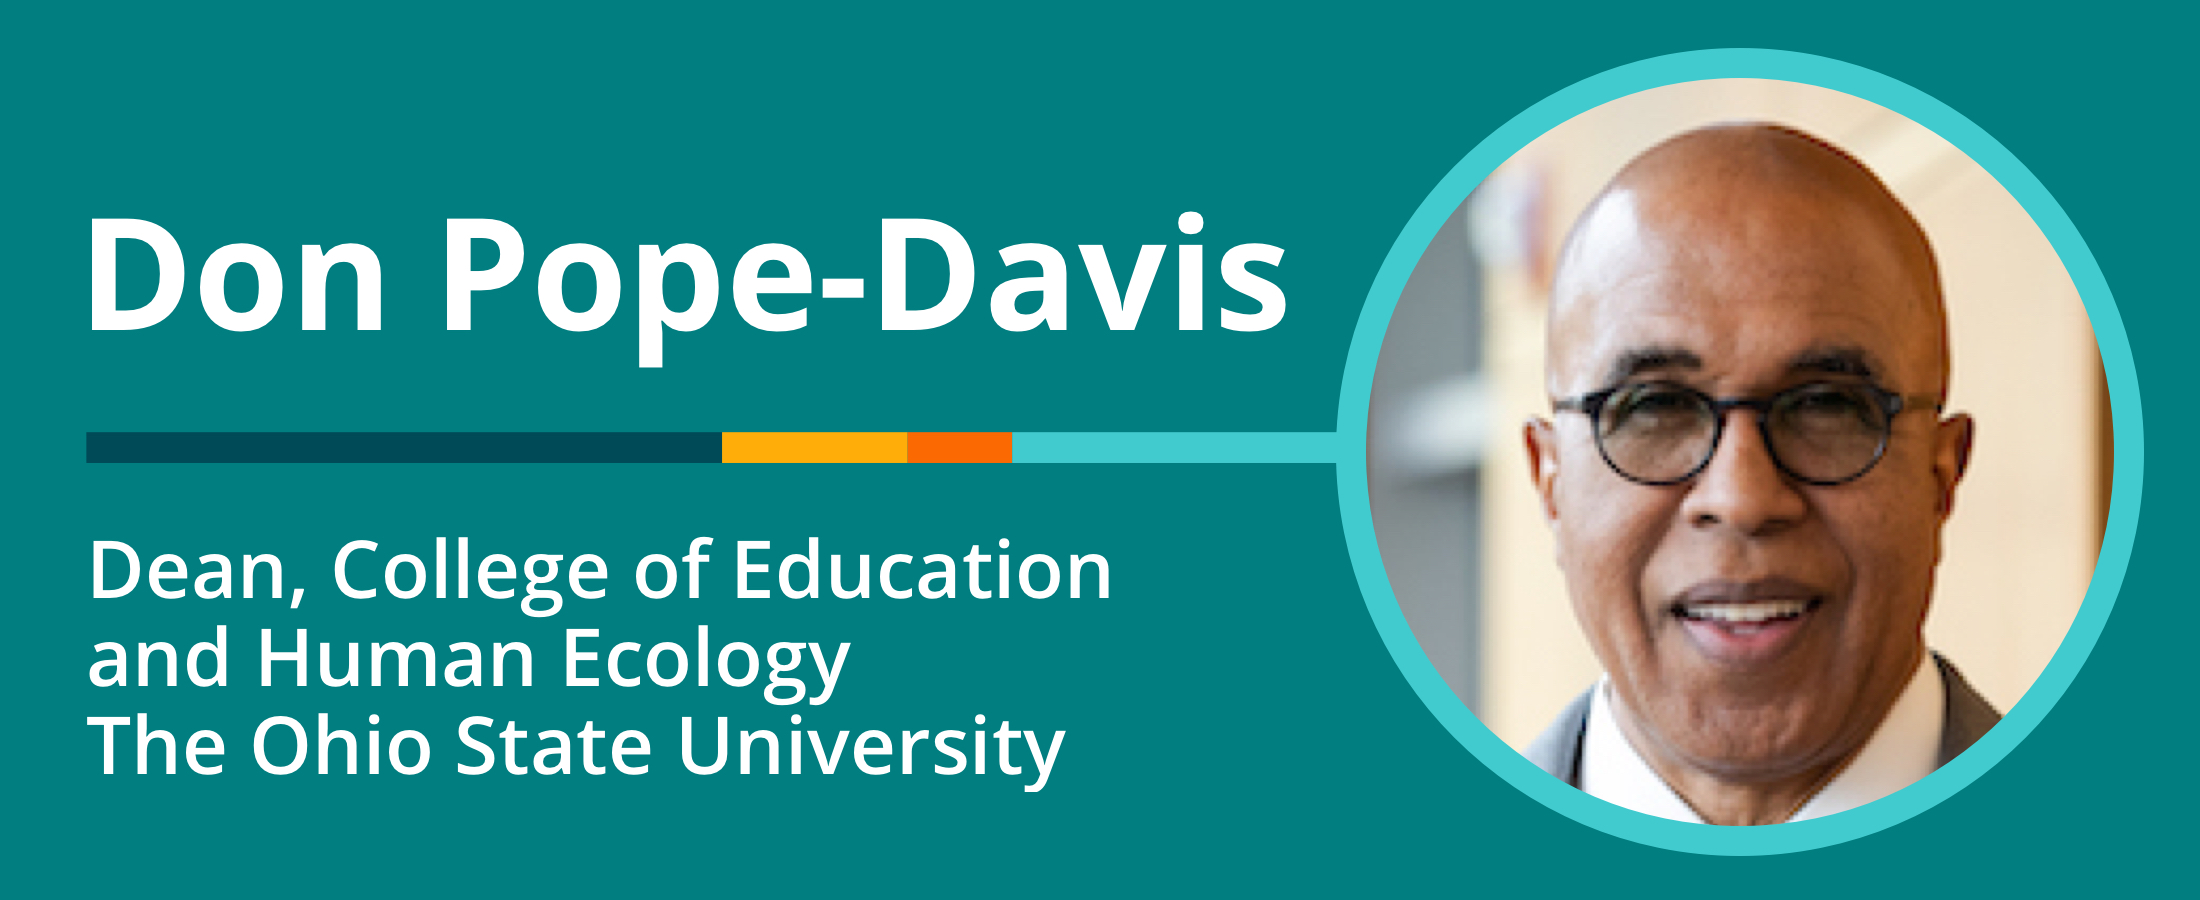 Dr. Don Pope-Davis, Dean, College of Education & Human Ecology, Ohio State University